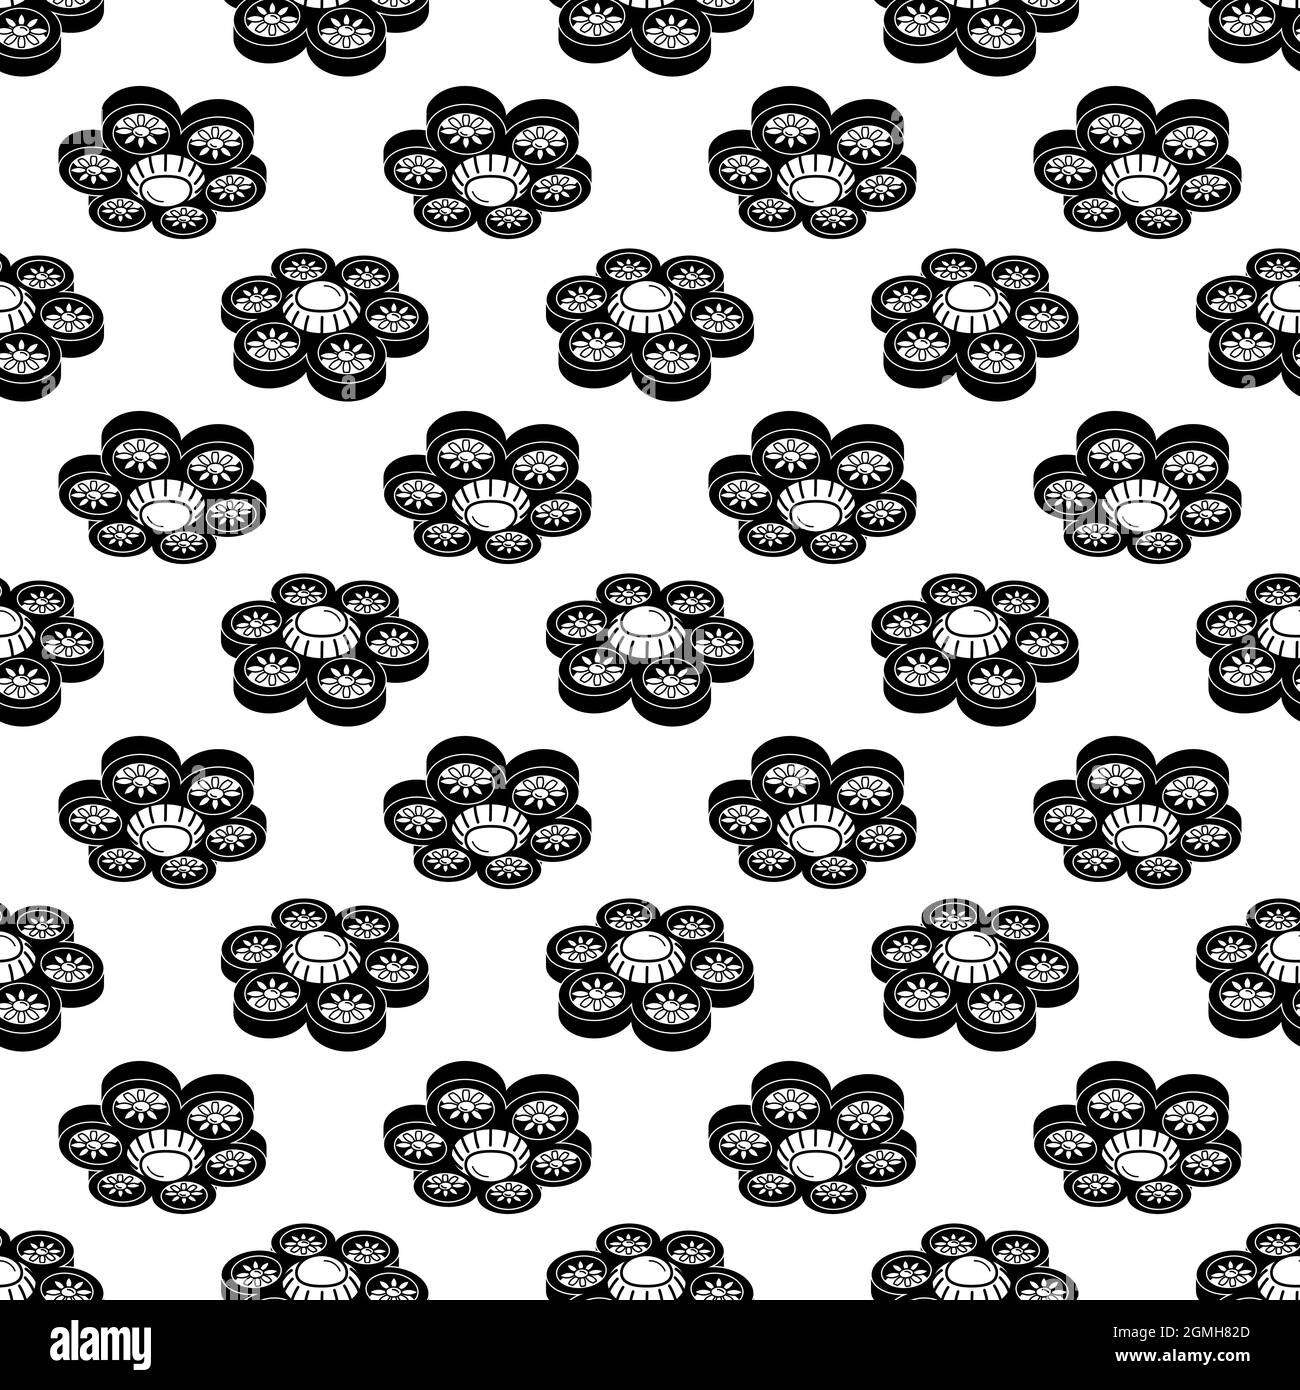 Protected hexacopter pattern seamless background texture repeat wallpaper geometric vector Stock Vector